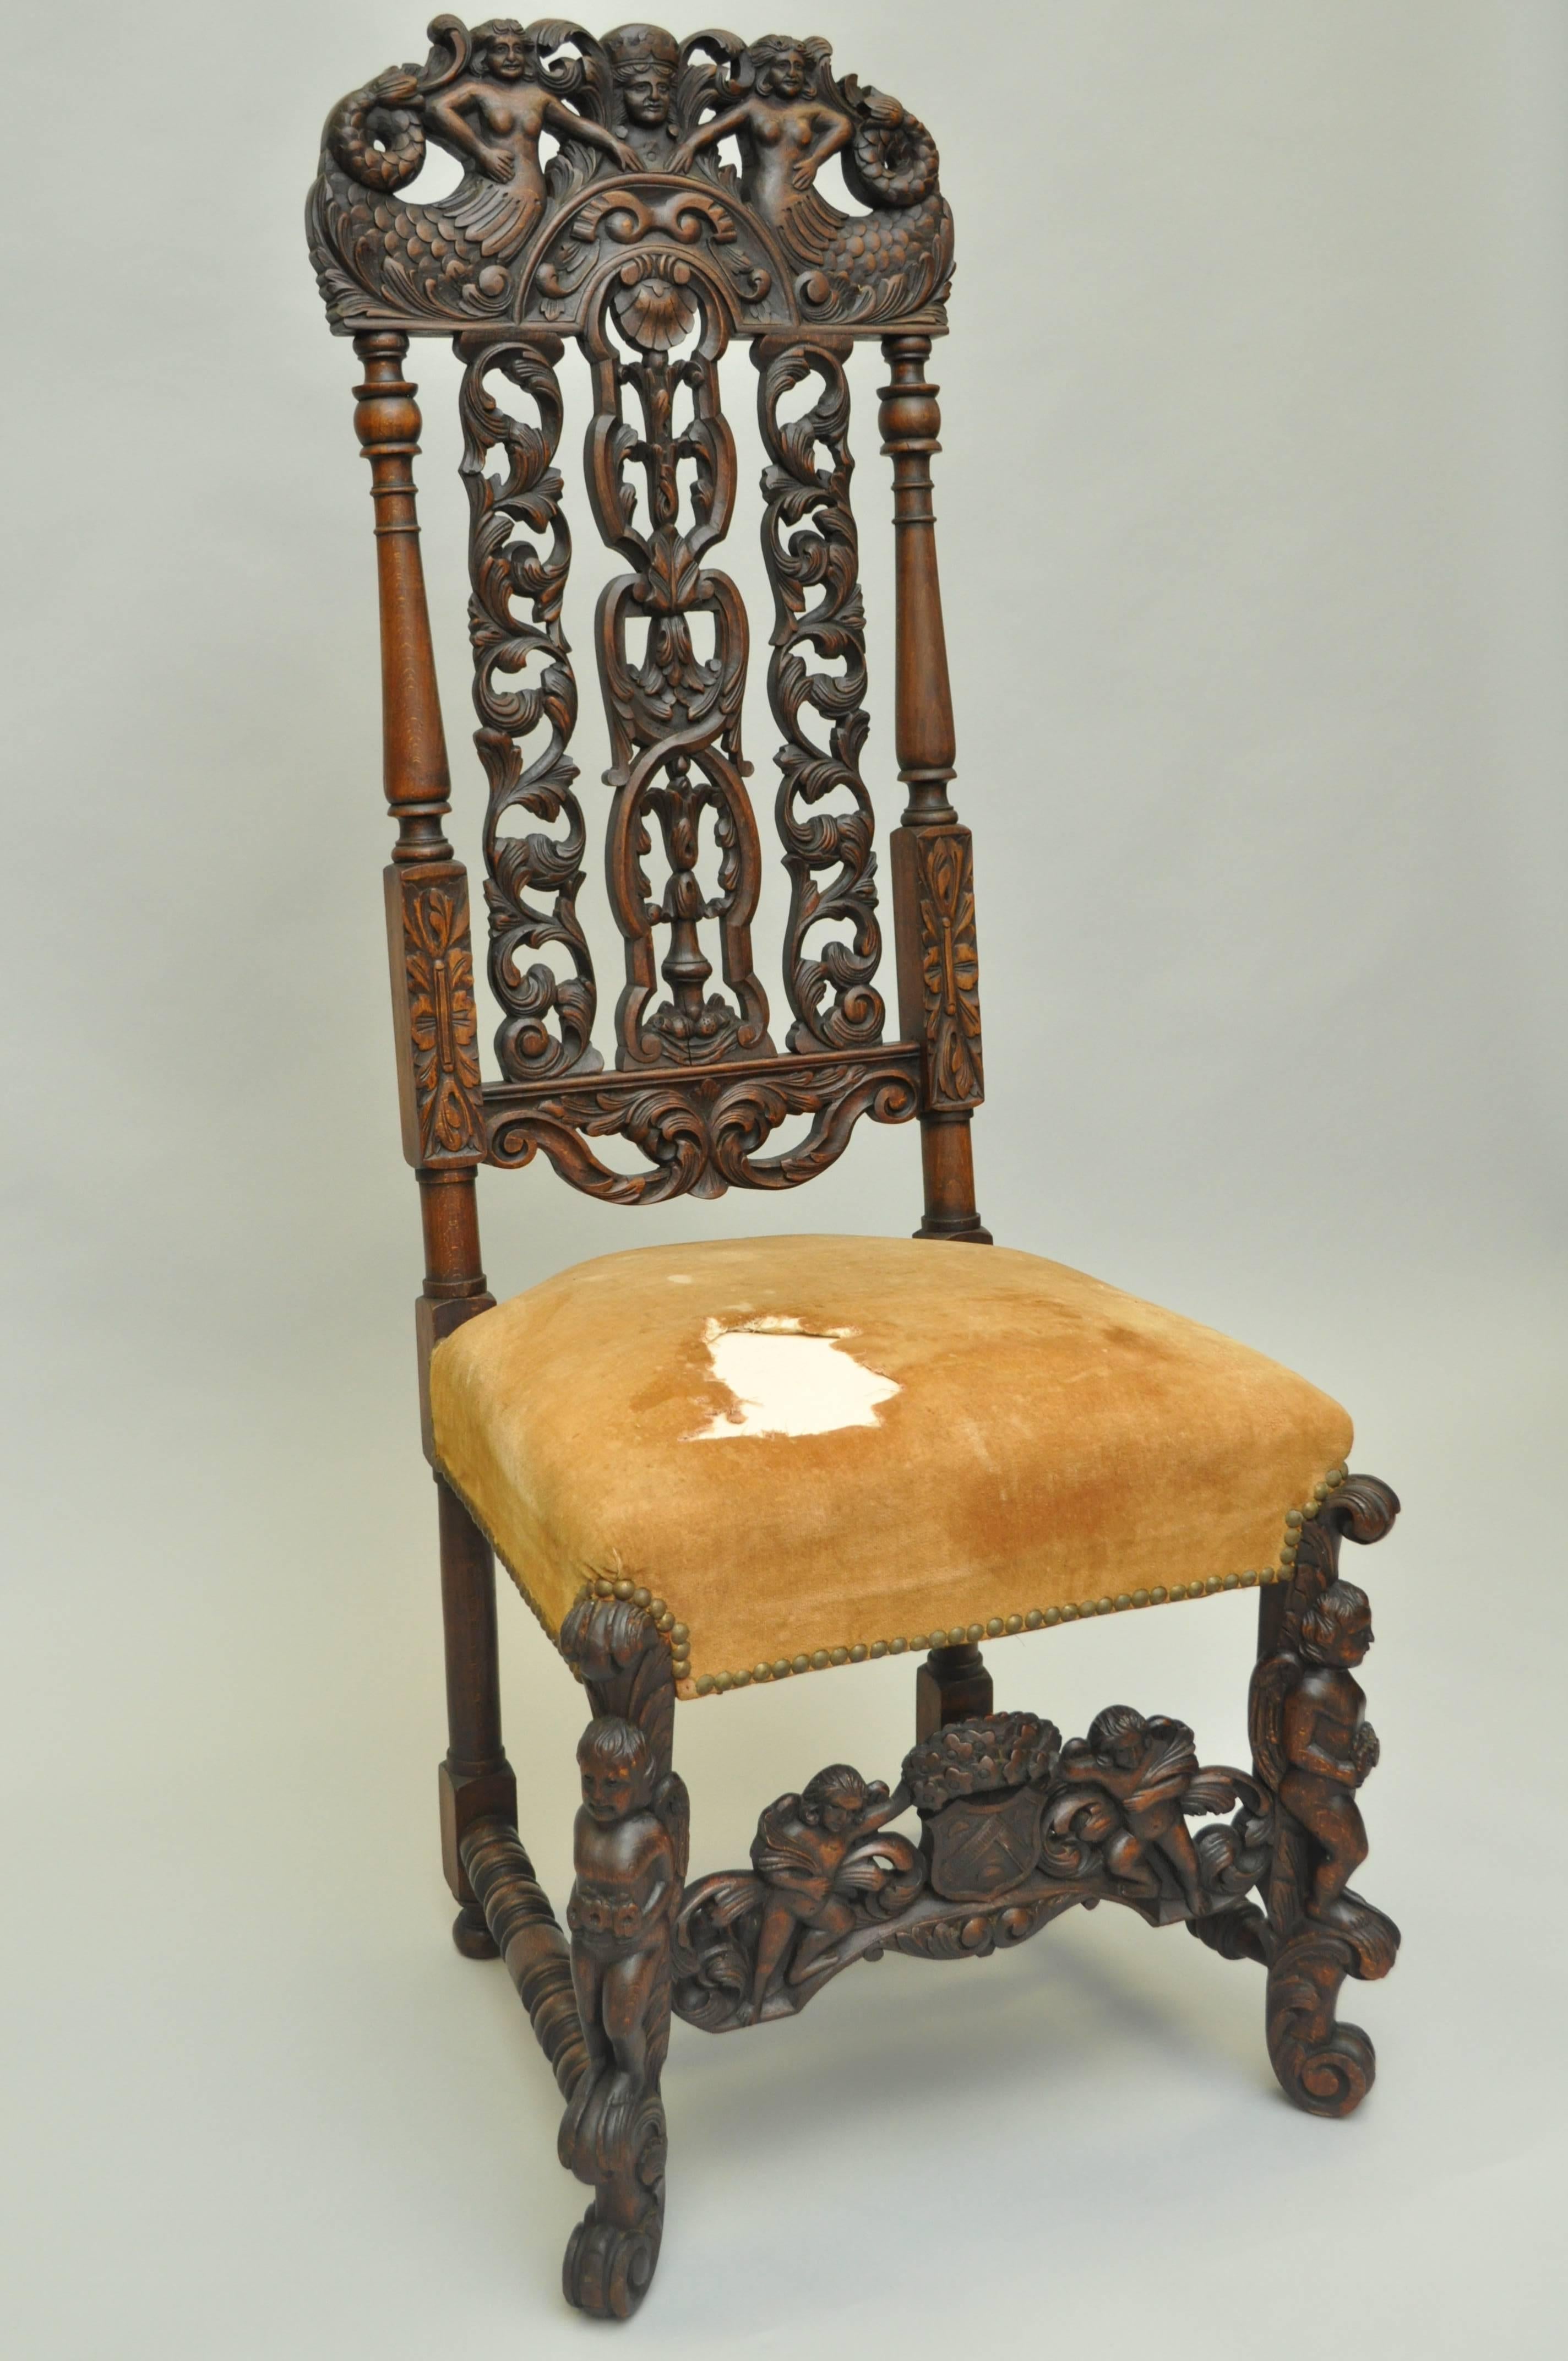 Finely carved 19th century solid walnut italian Renaissance tall back side chair. Item features an ornate fully carved solid walnut wood frame with Mermaids on the crest and winged cherubs on the legs and stretcher. The chair is further accented